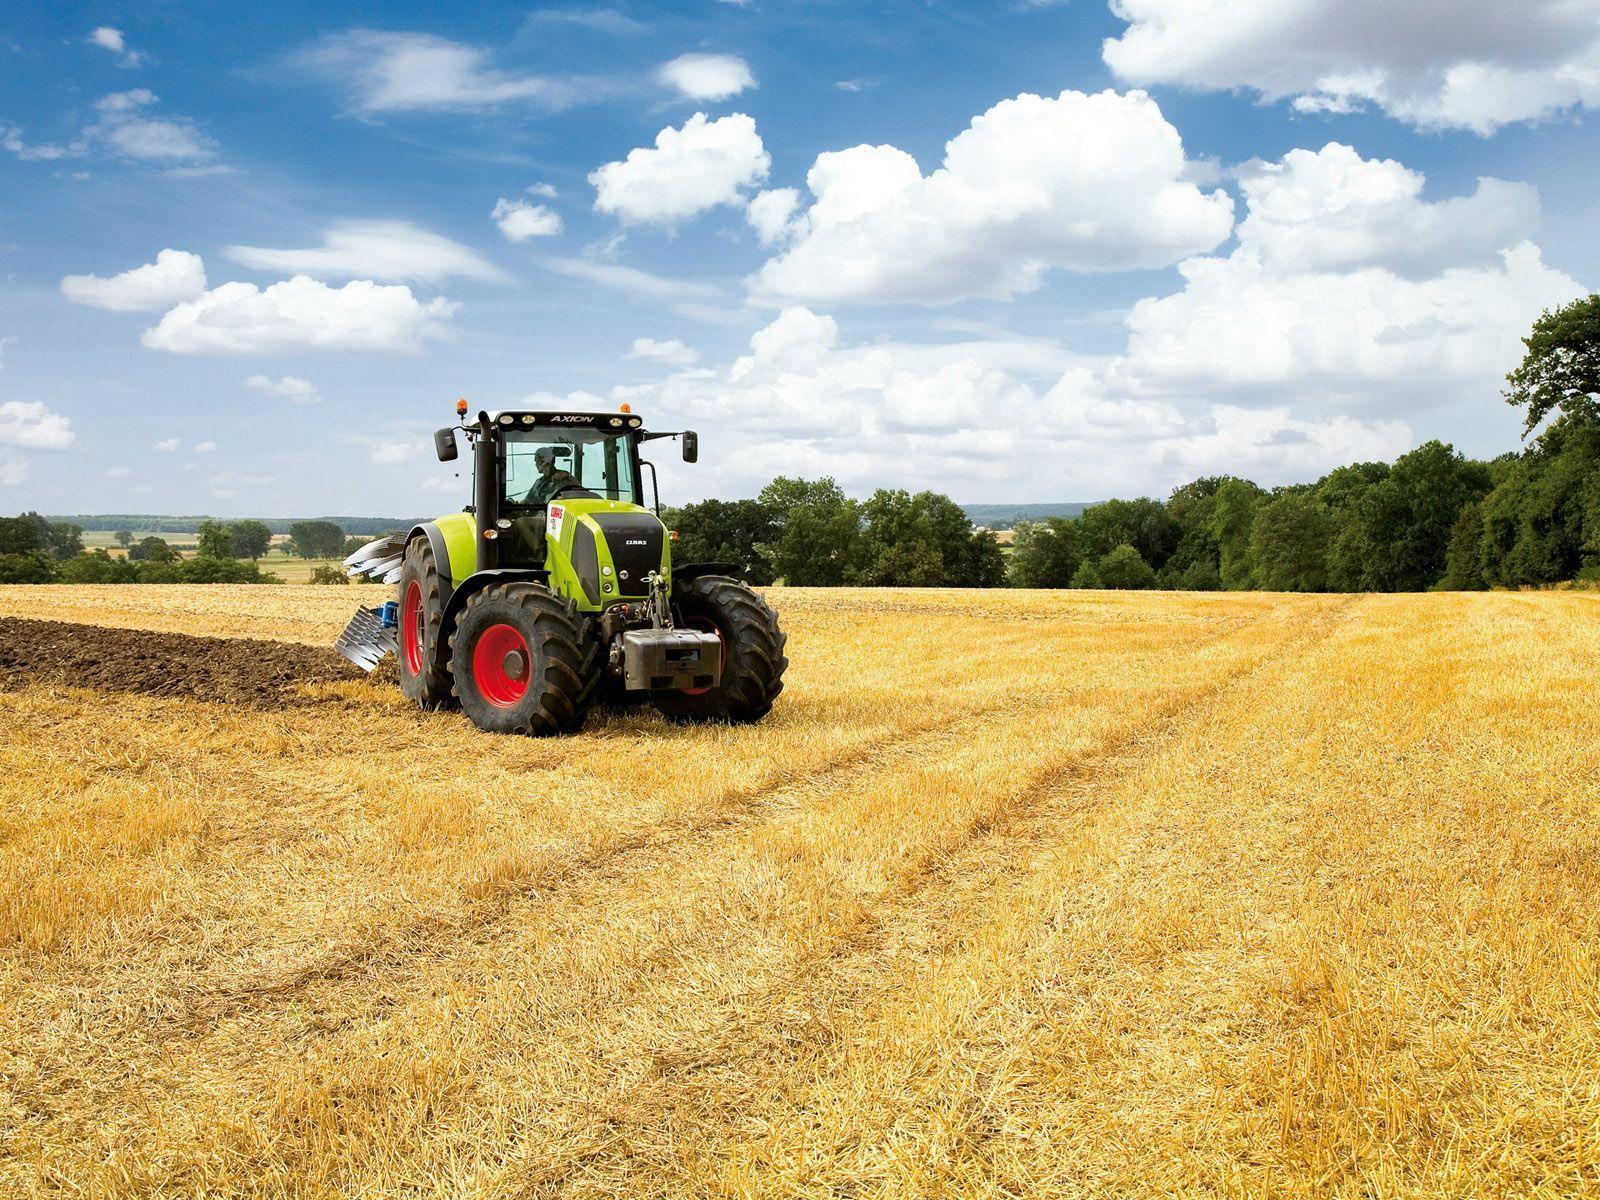 Related Picture Wallpaper Claas